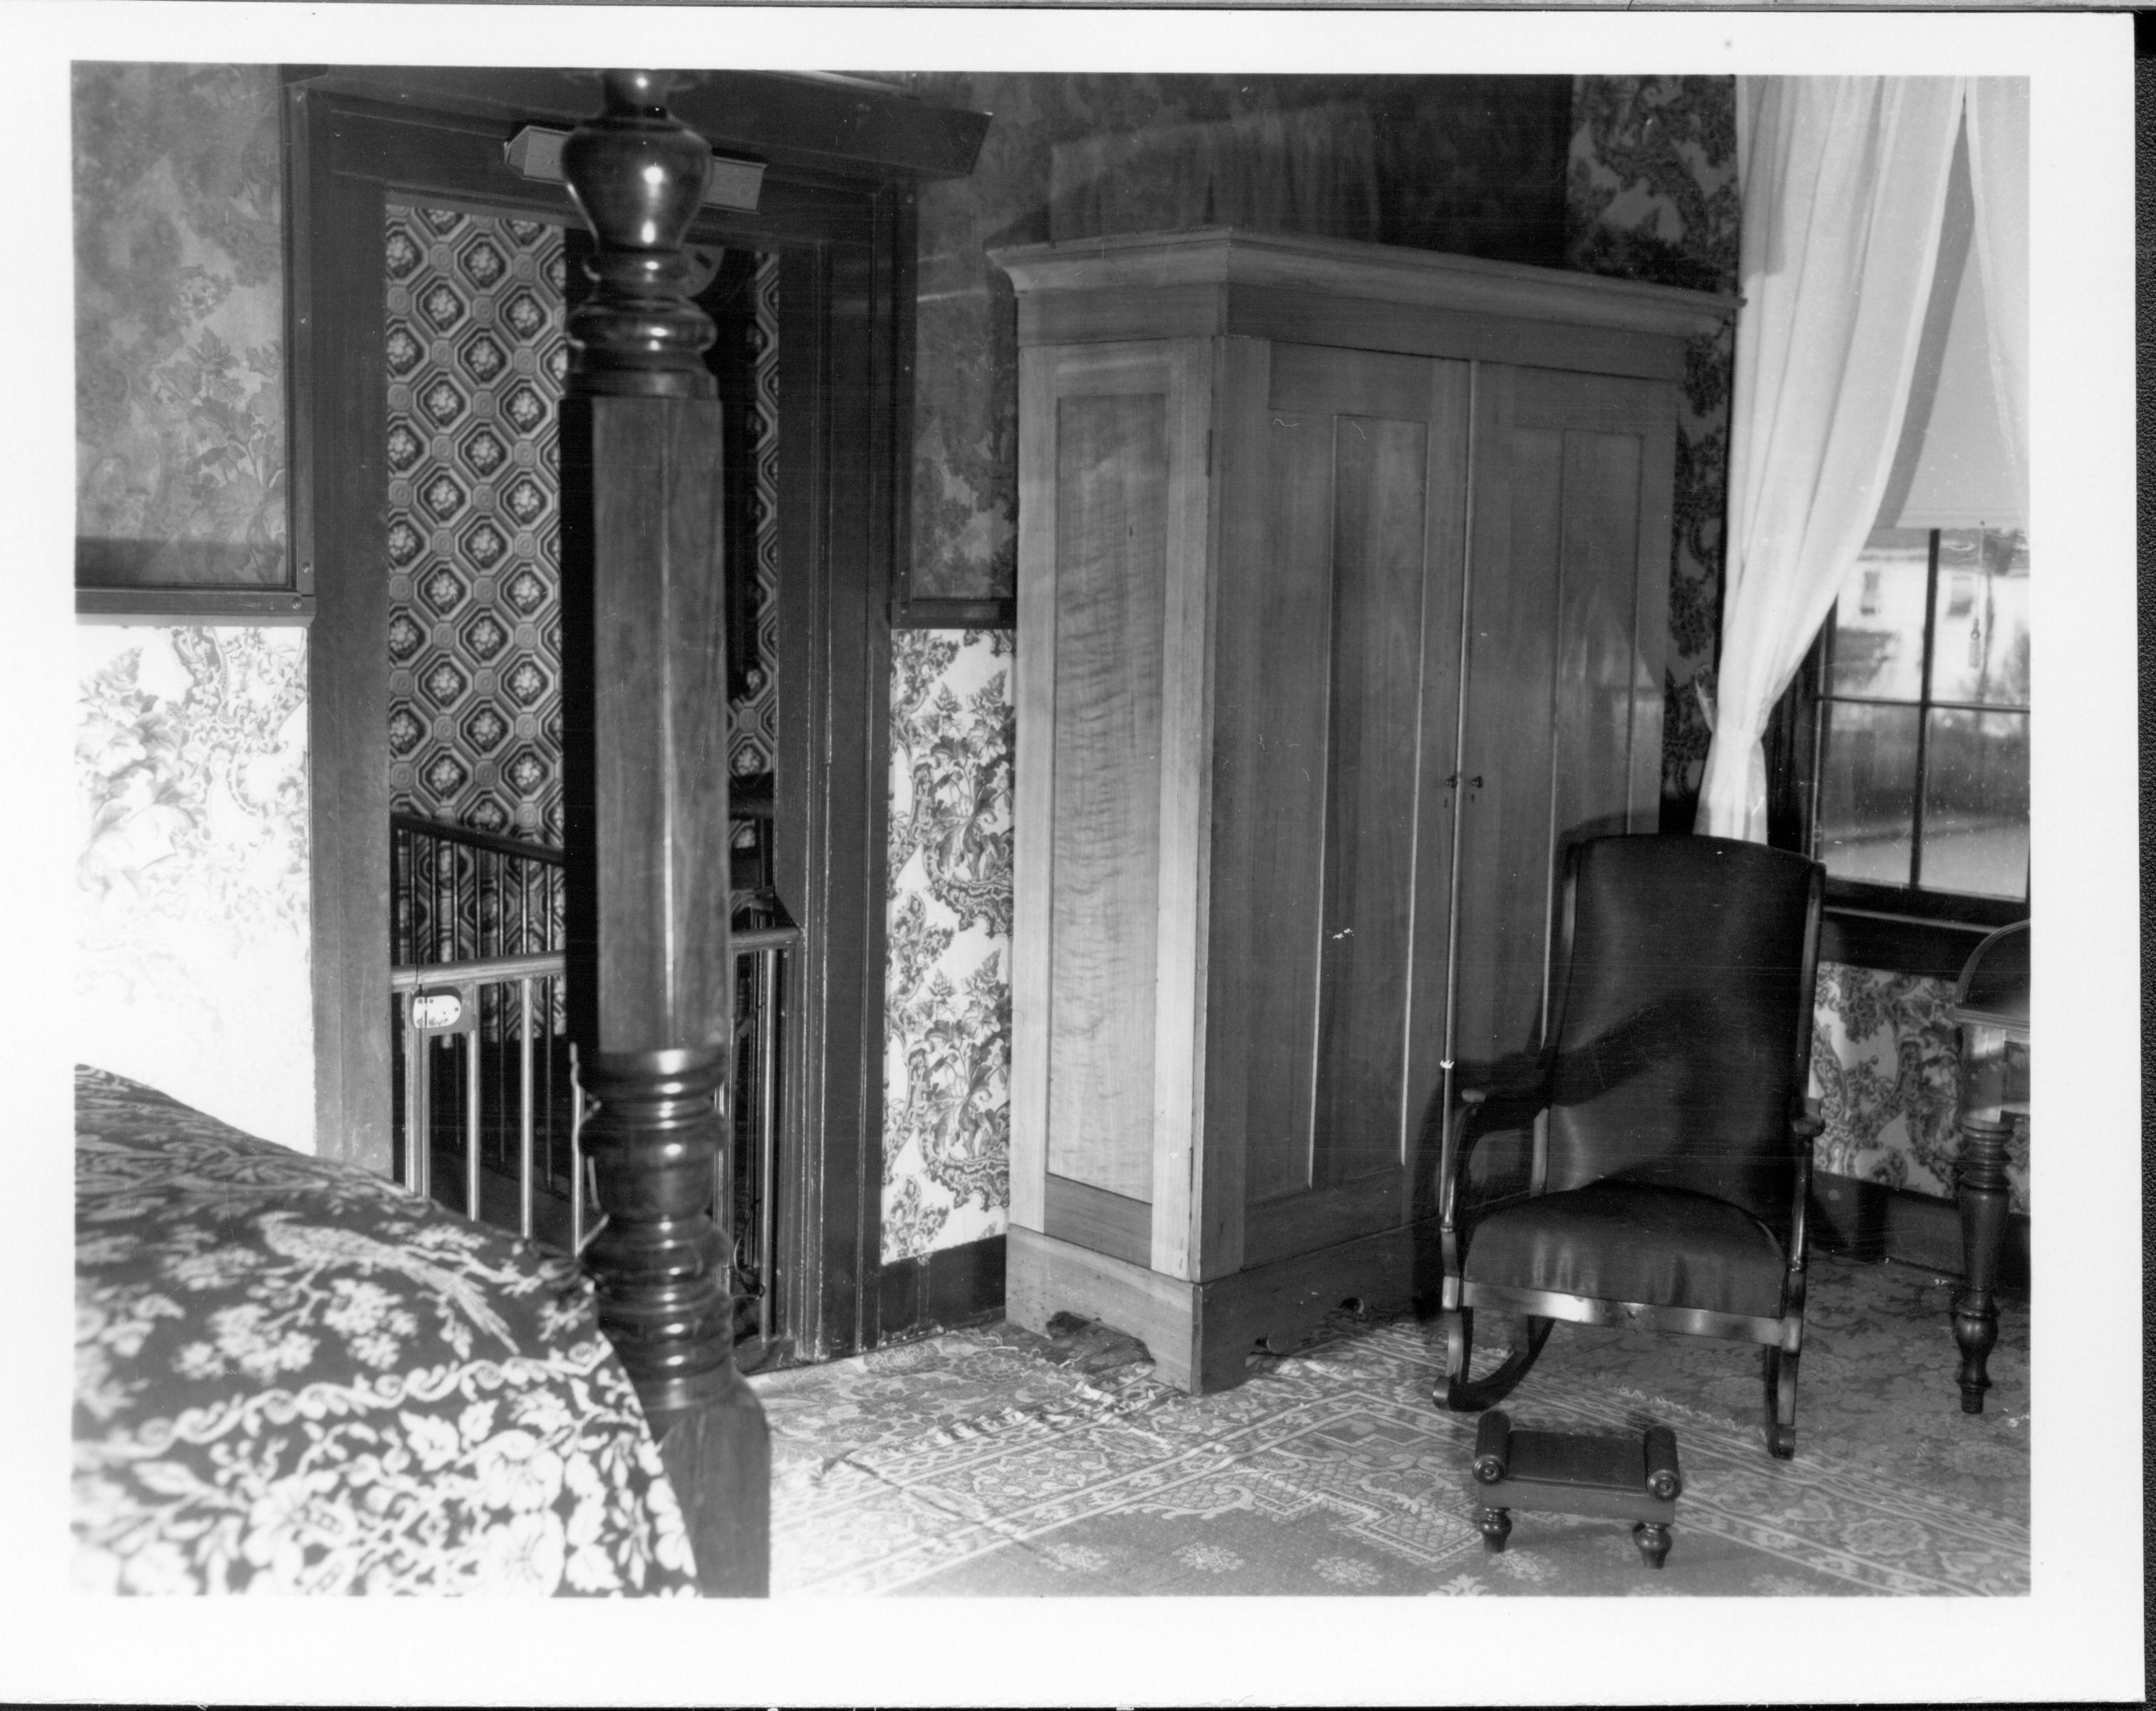 Spindle Desk - Lincoln's Home class 1, picture 24 Lincoln Home, Bedroom, bedpost, rocking chair, wardrobe